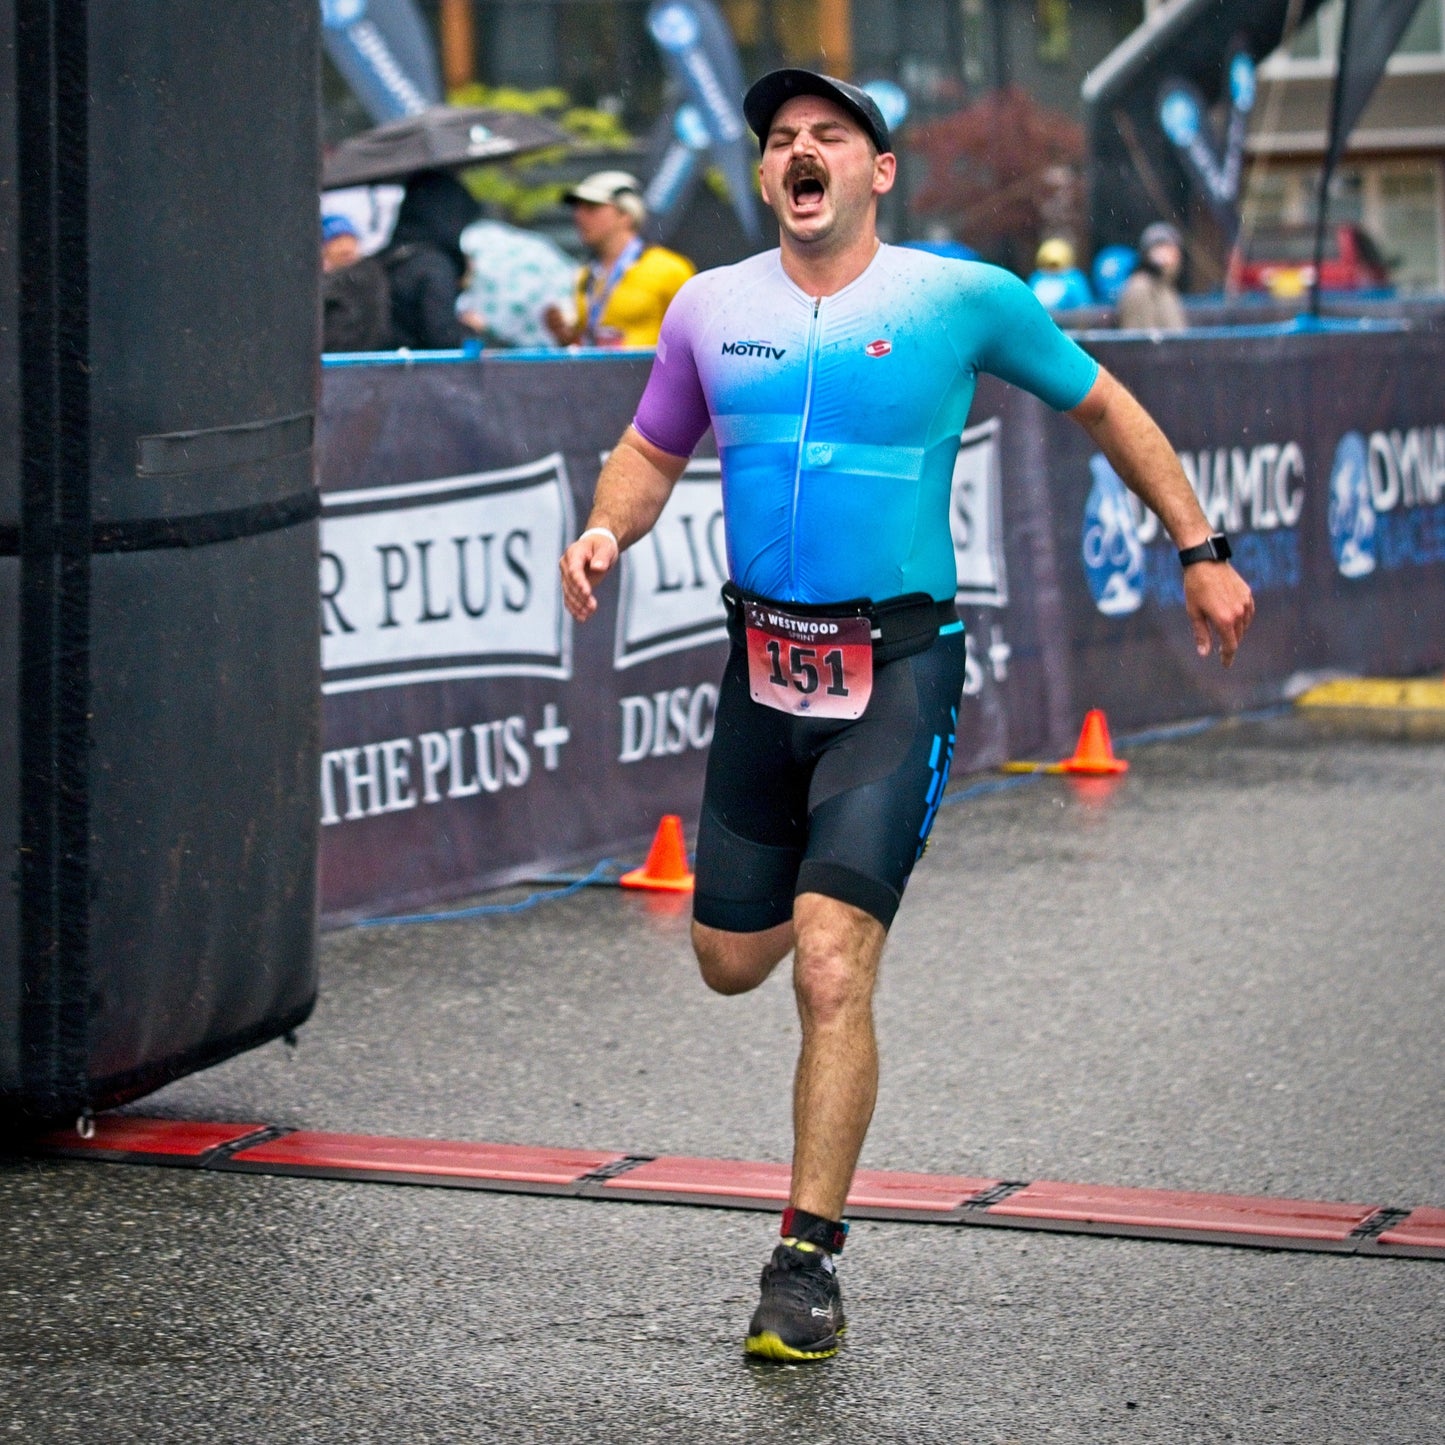 Man yelling hurray while crossing a finish line of a running race, wearing a triathlon suit